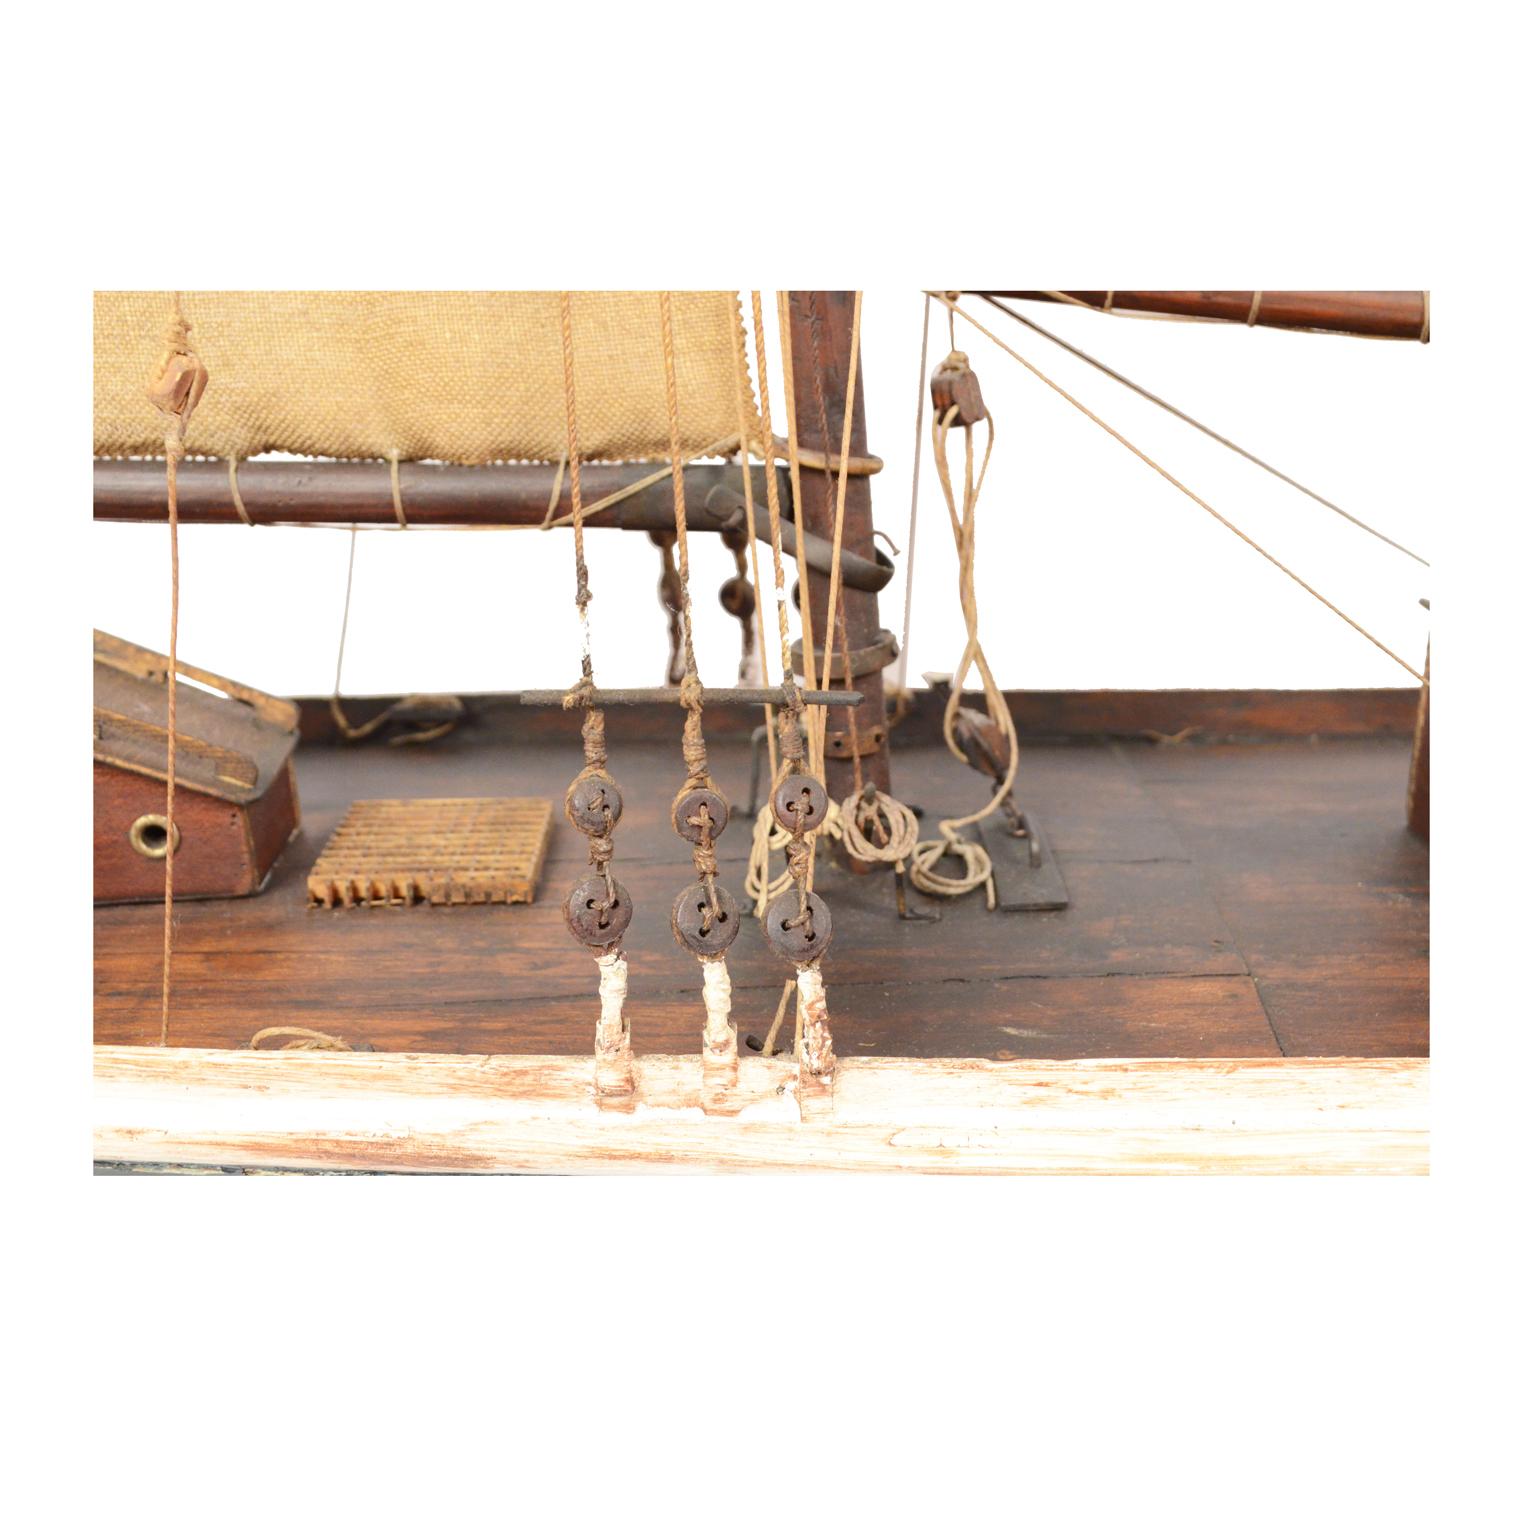 20th Century Vintage Wooden Sailing Model of a Schooner, Early 1900s